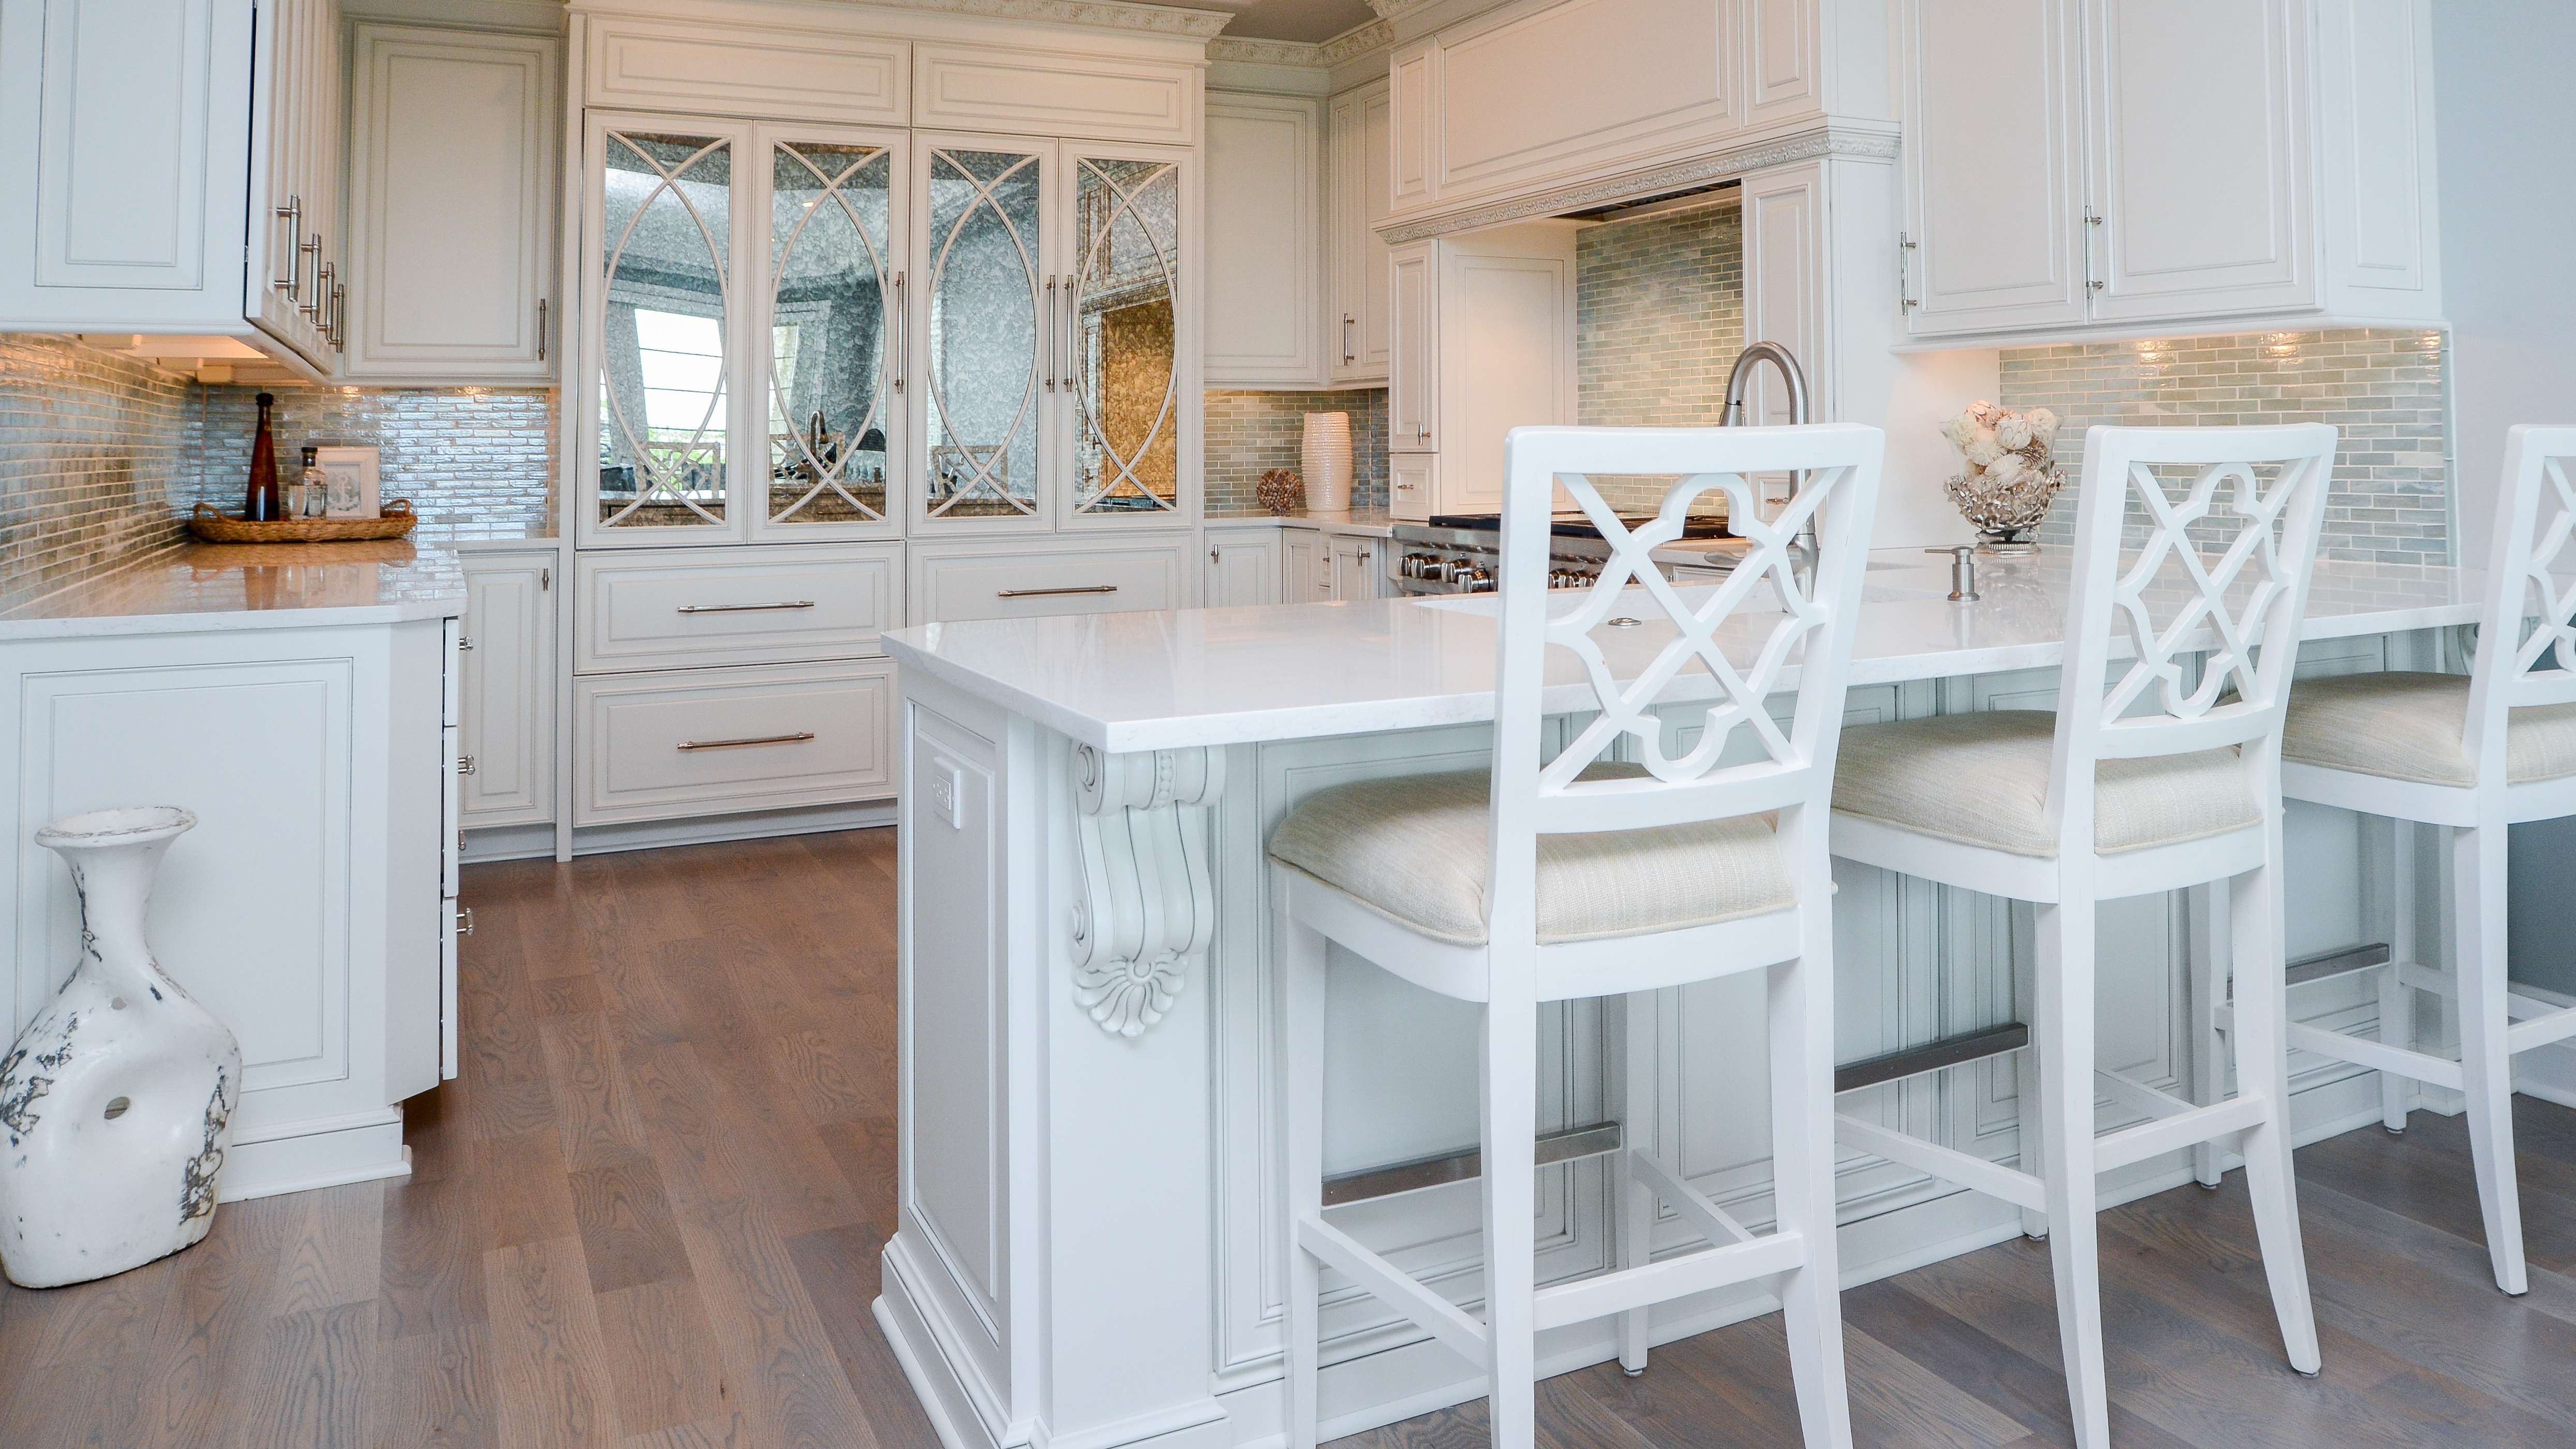 A kitchen that has received kitchen remodeling services in Hammonton, NJ